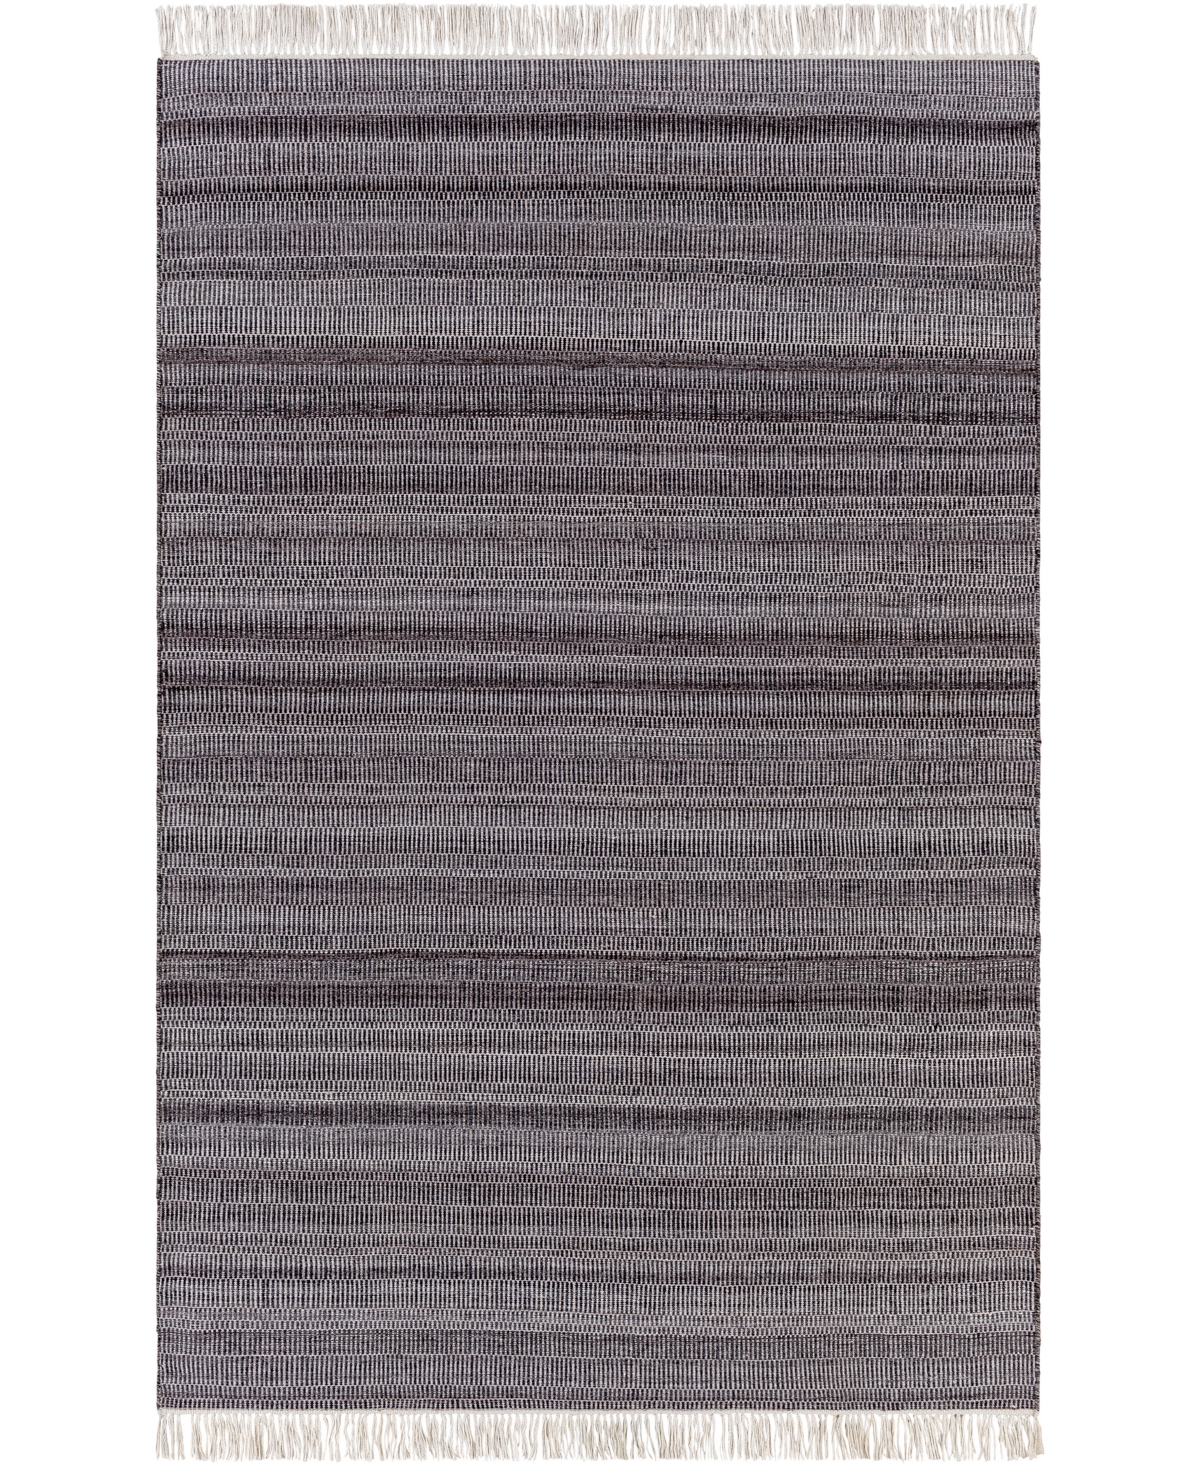 Surya Lily Lyi-2304 6in x 9' Outdoor Area Rug - Charcoal